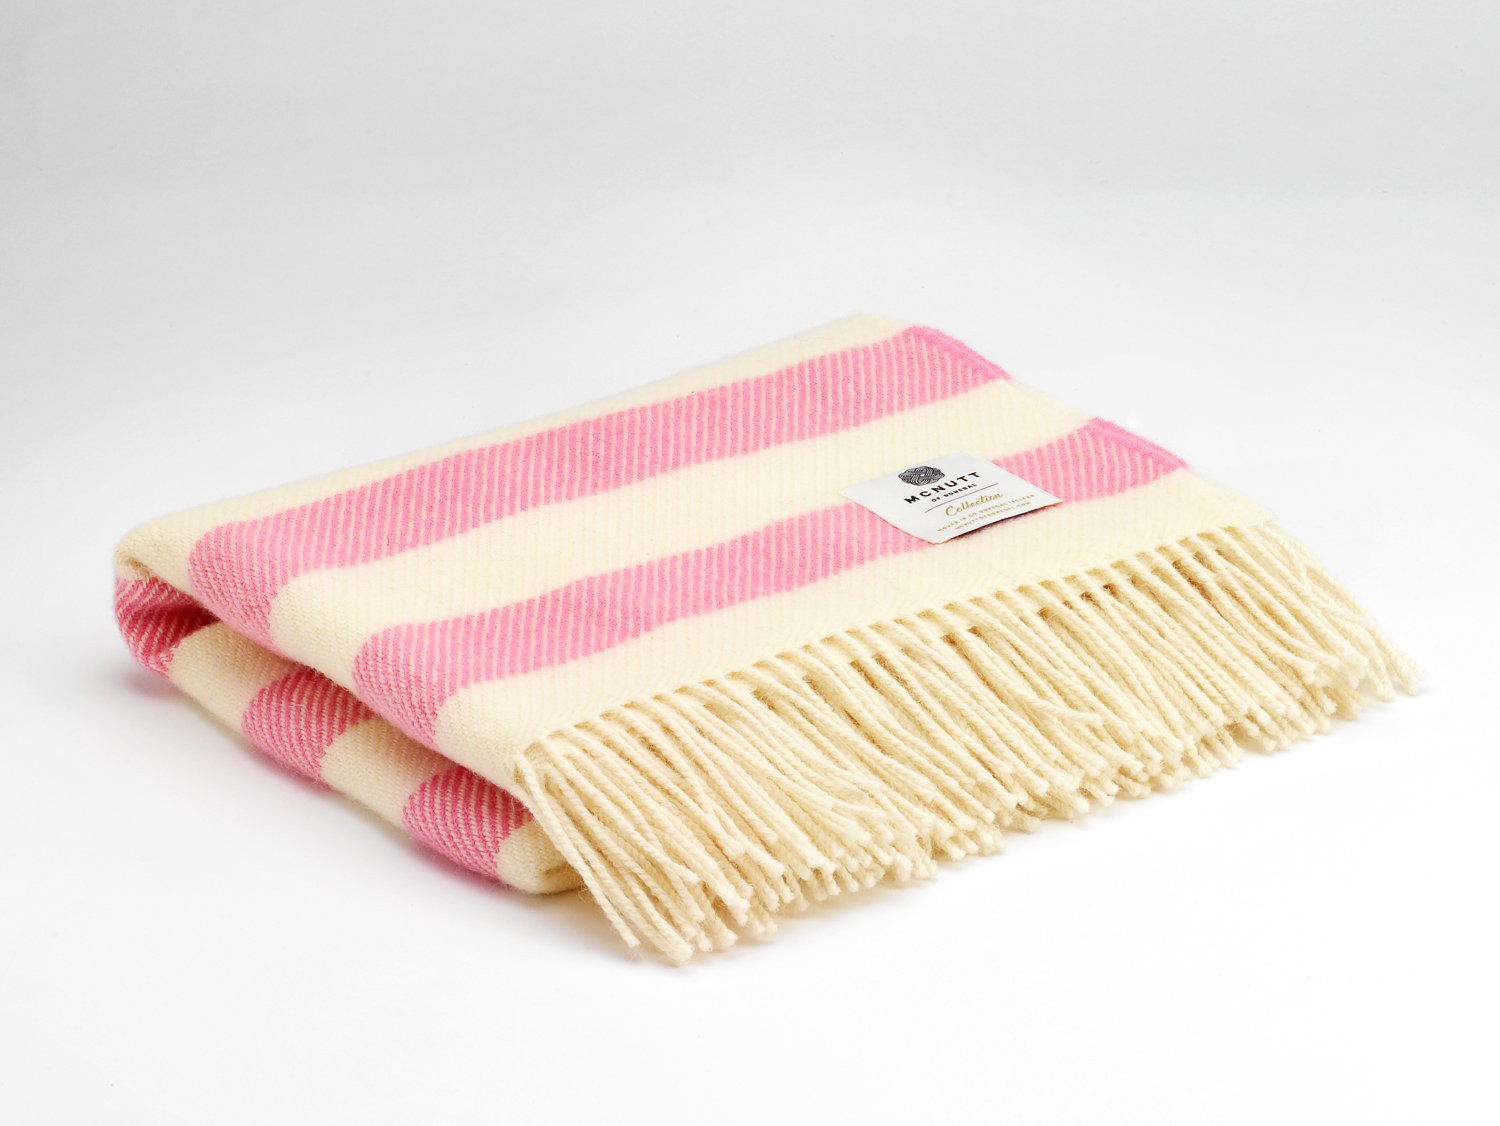 McNutt of Donegal, Mini Blanket - Playful Pink